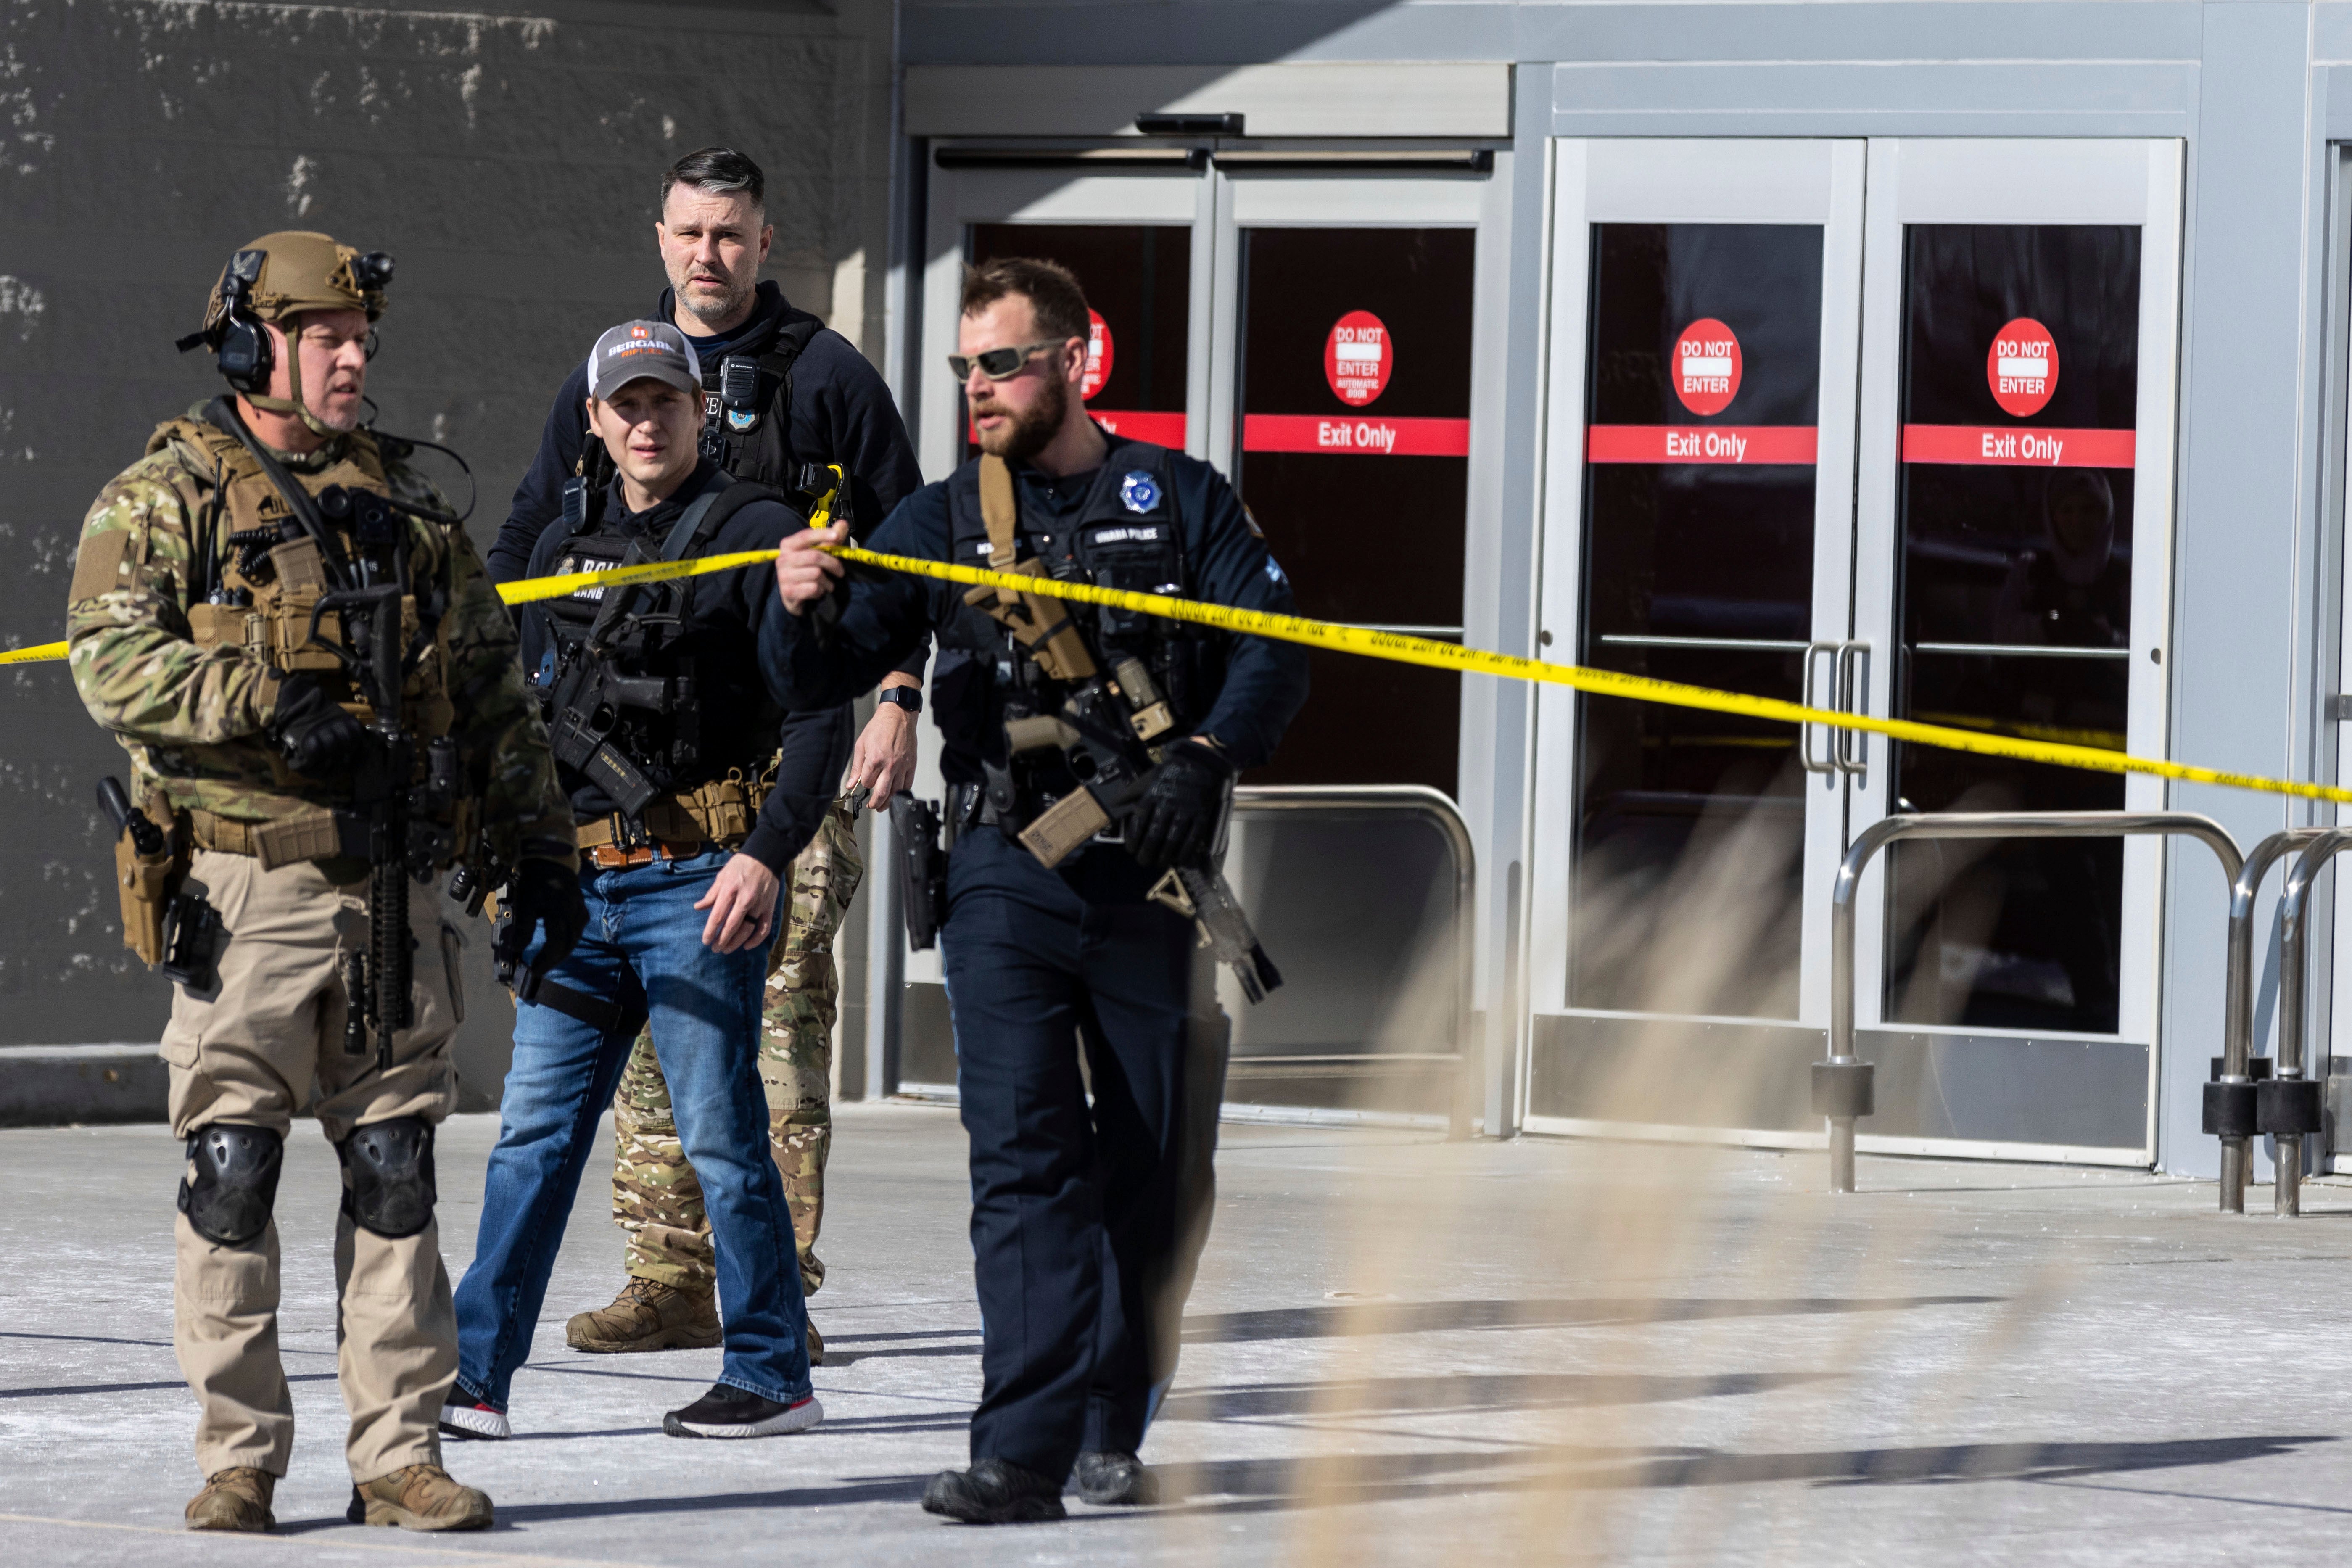 Law enforcement officers are pictured at the scene of a reported shooting at a Target store in Omaha